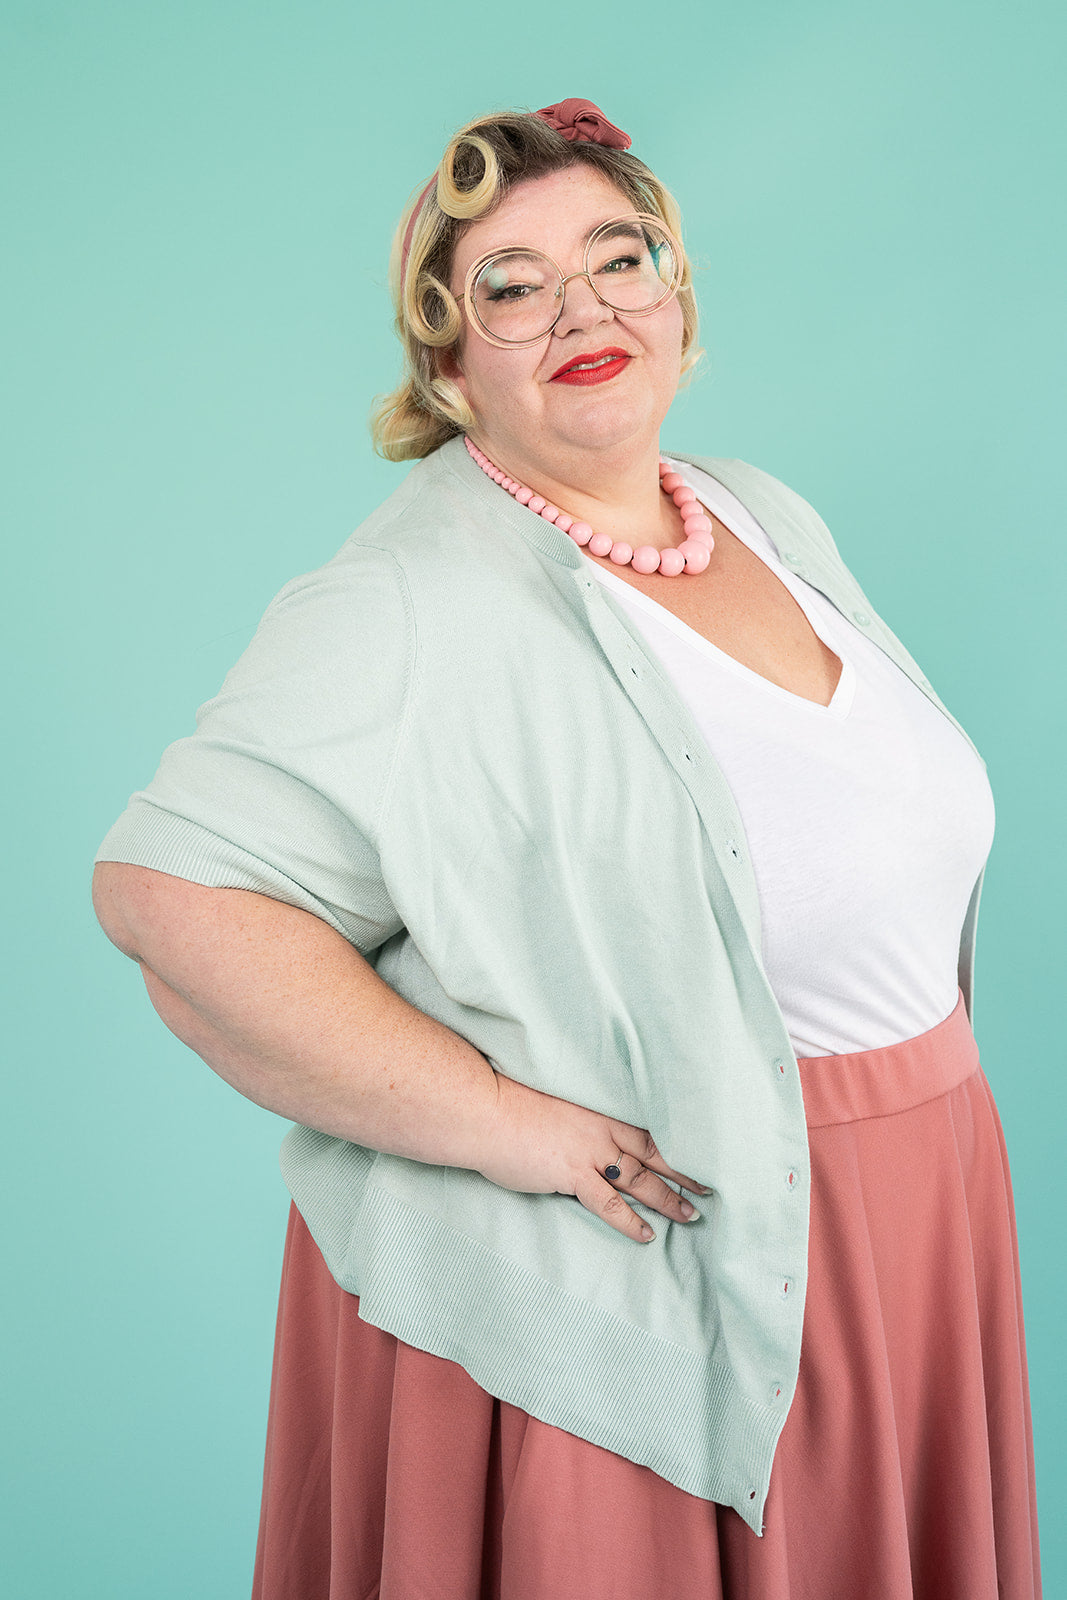 A plus-size blonde woman is standing with her hands on her hips and smiling. She is wearing a light blue cardigan, a white tshirt and a pink skirt